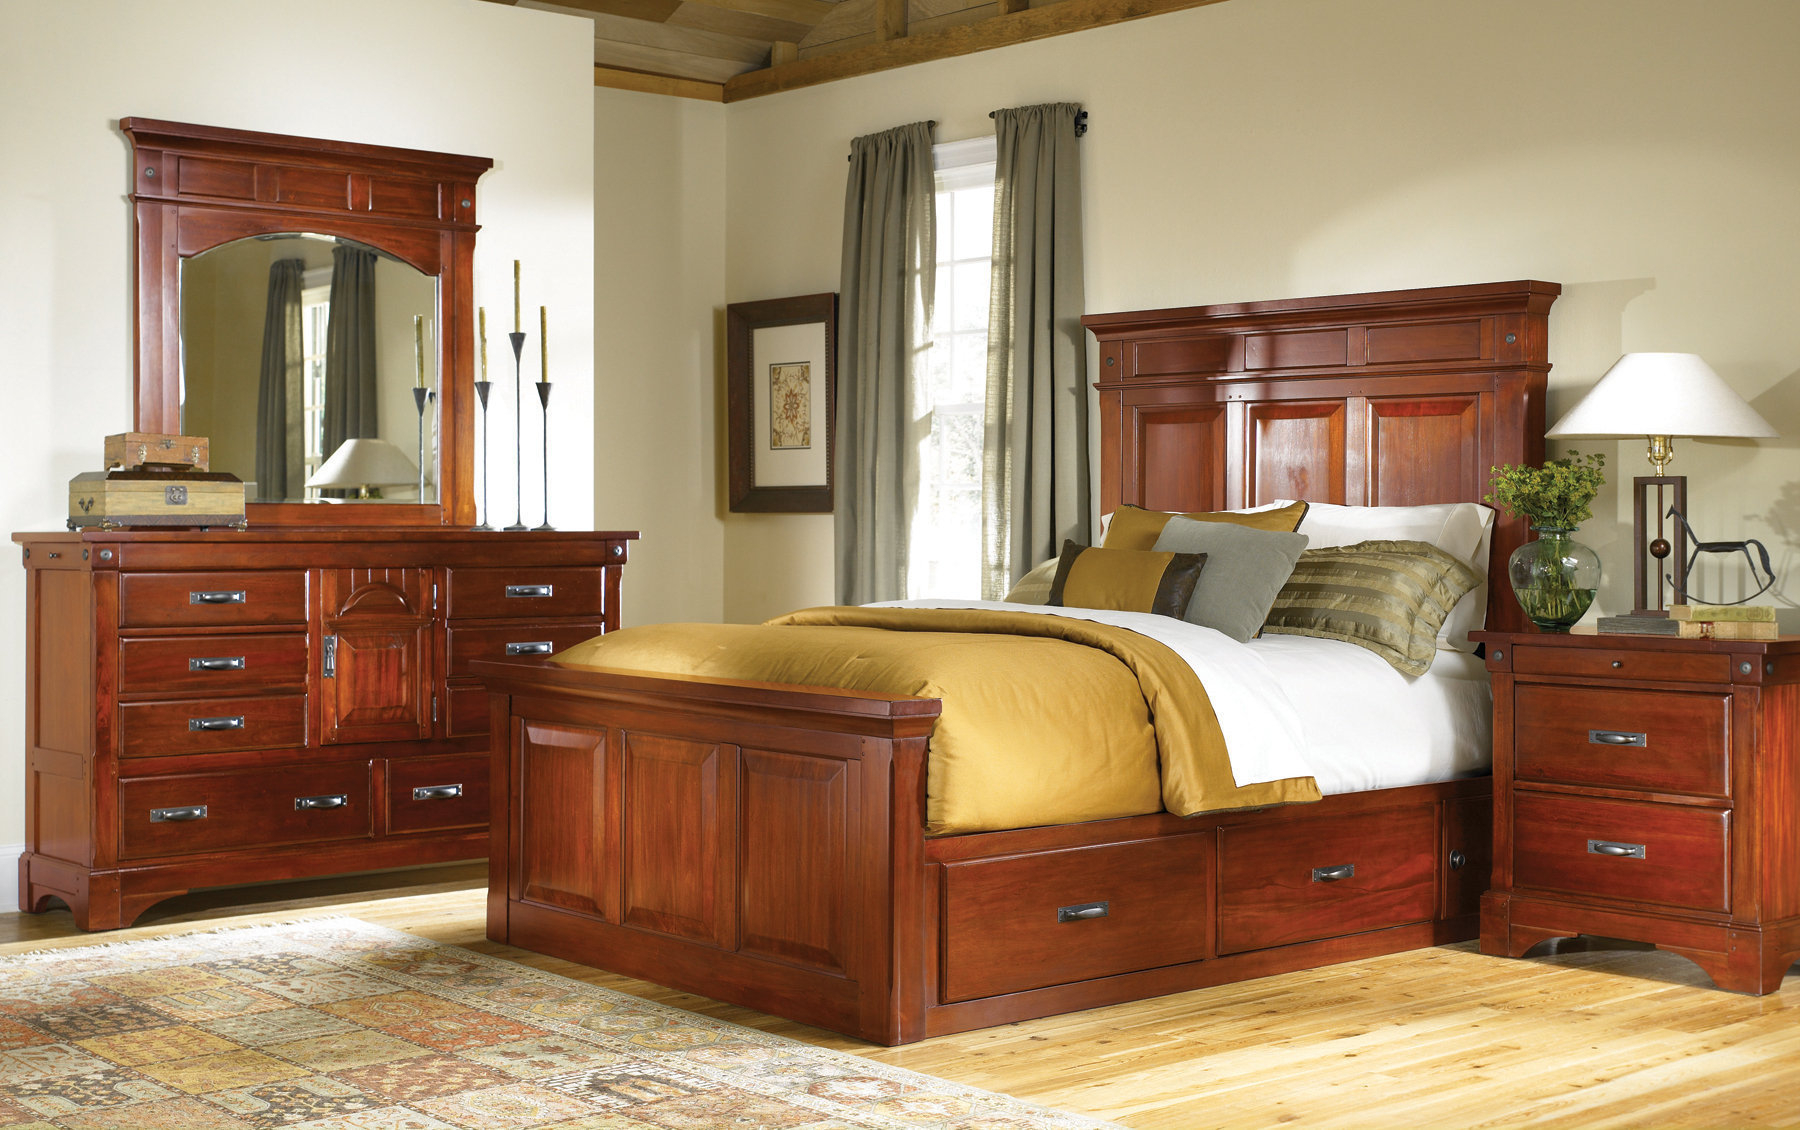 Mahogany Storage Bed Classic King And Queen Solid Wood Bedroom pertaining to size 1800 X 1130